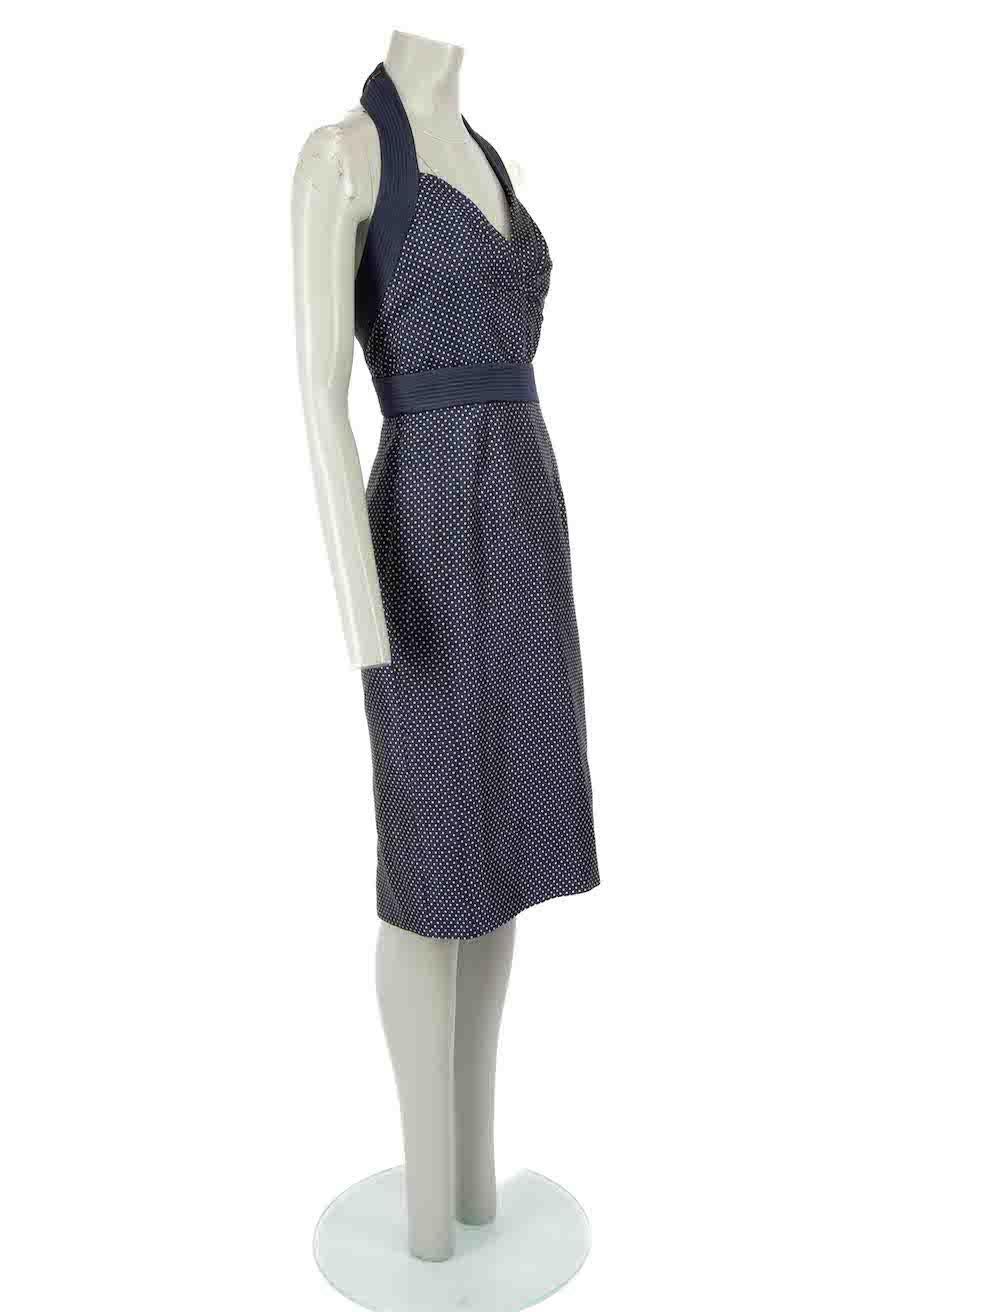 CONDITION is Very good. Hardly any visible wear to dress is evident apart from single pluck to neckline stitching on this used Alexander McQueen designer resale item.
 
 Details
 Navy
 Silk
 Dress
 Polkadot pattern
 Halterneck
 Sweetheart neckline
